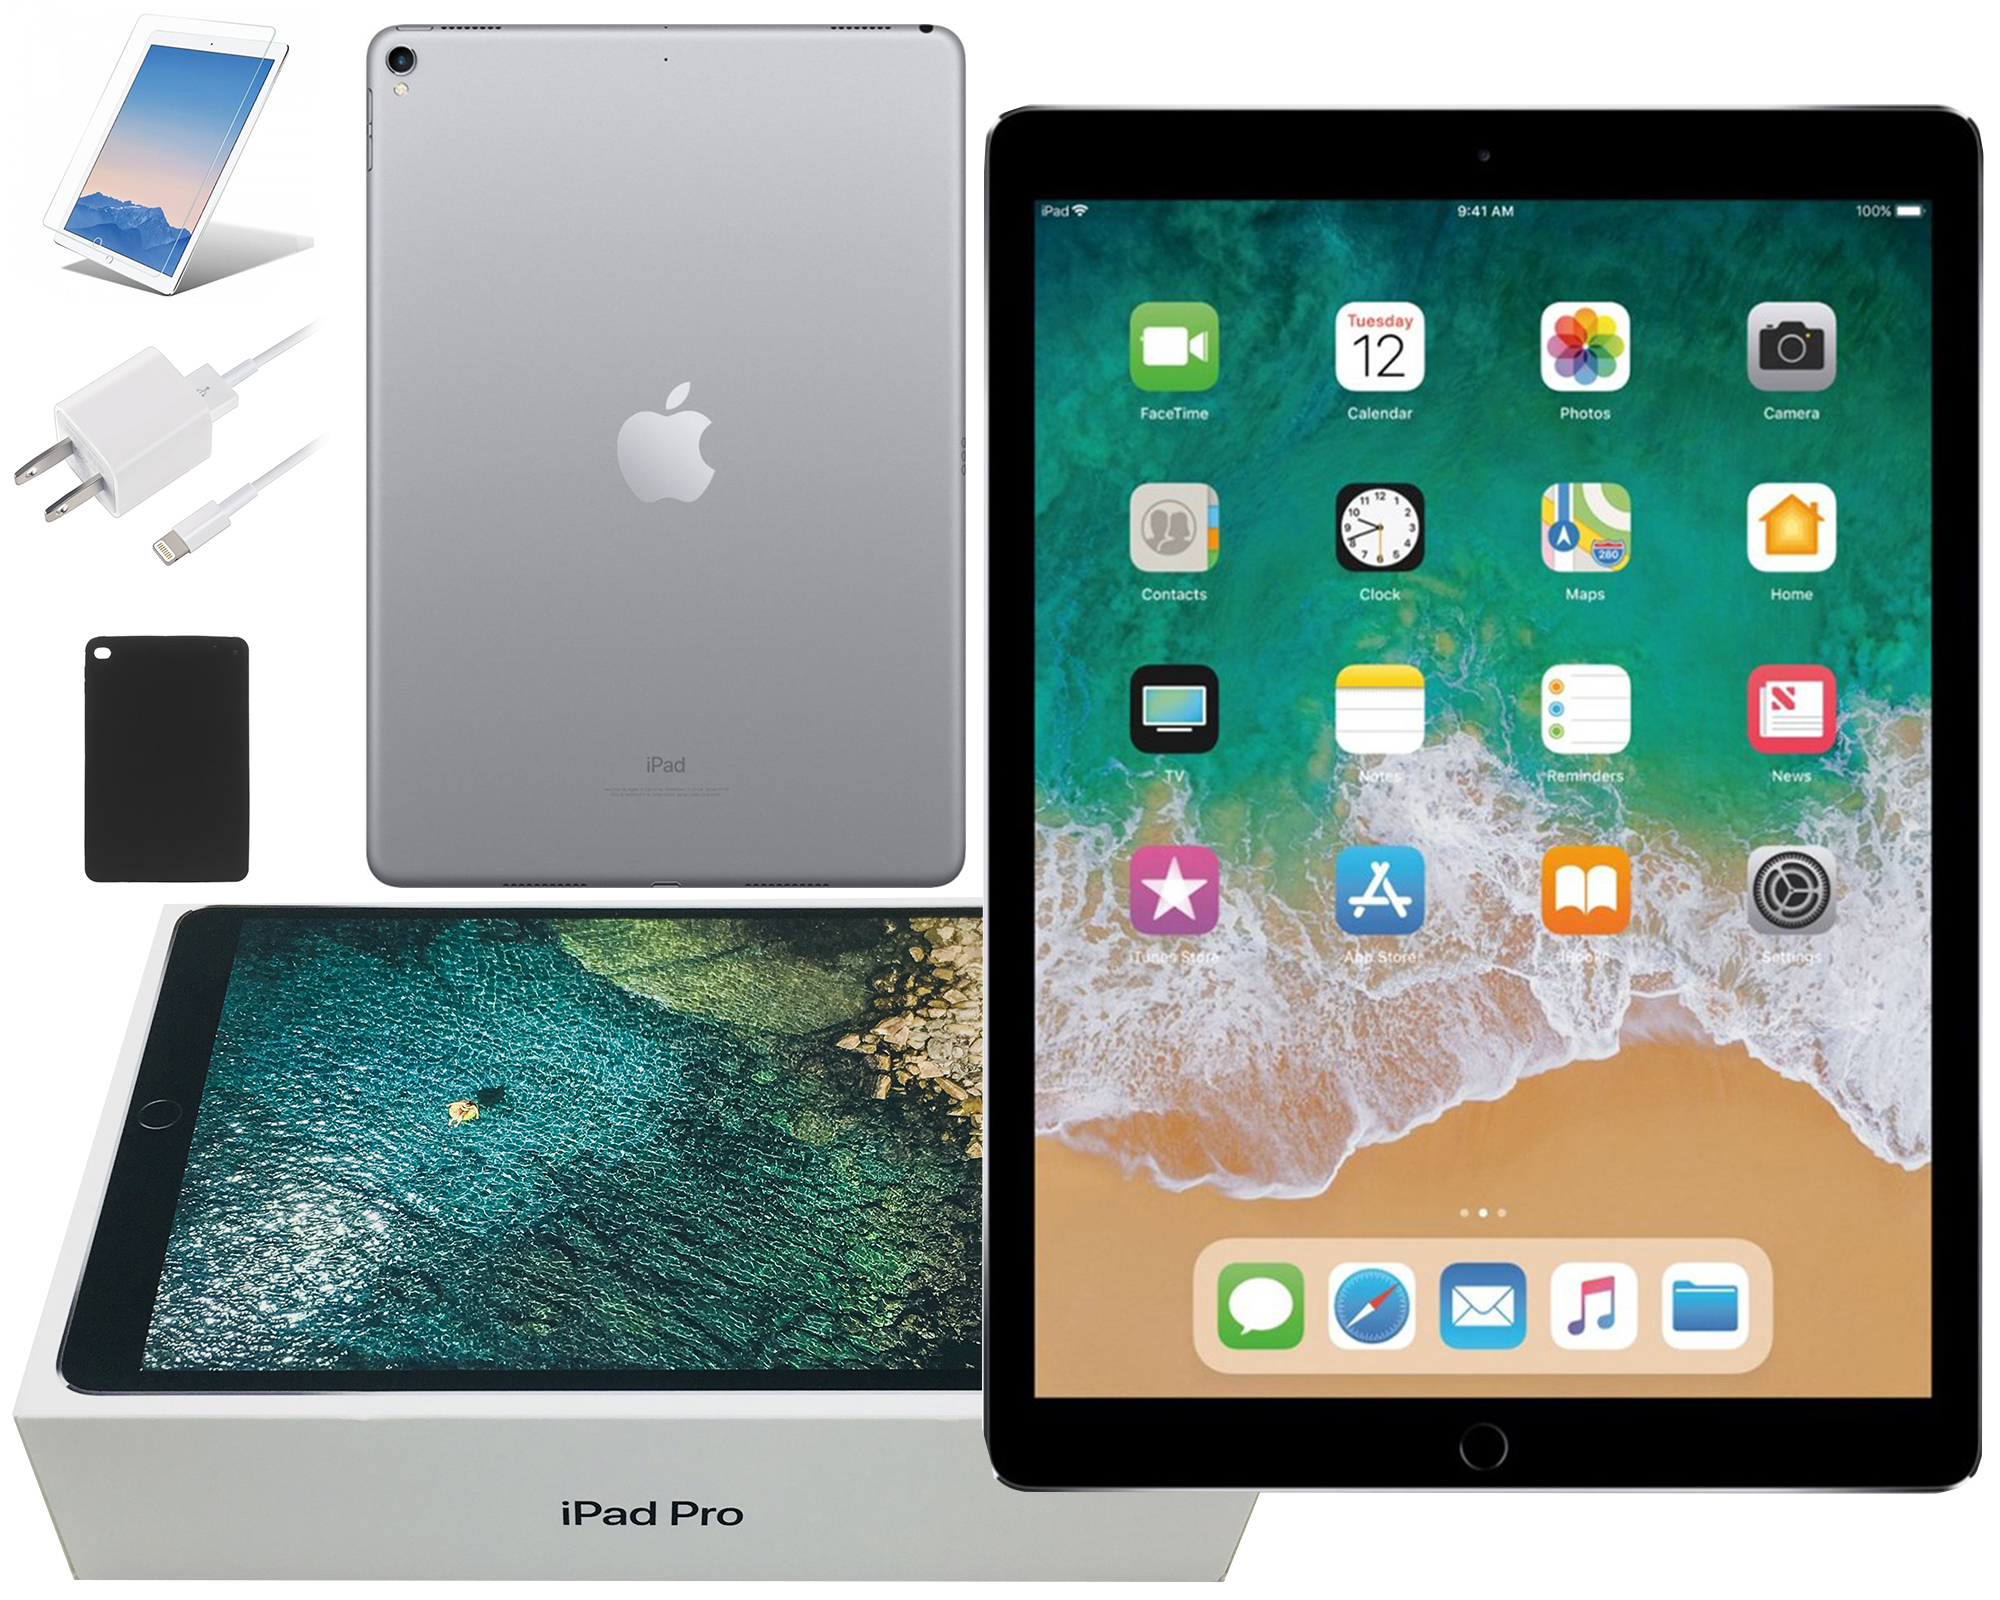 Apple iPad Pro, 10.5-inch, 64GB, Wi-Fi Only, Comes with Bundle: Case,  Tempered Glass, Rapid Charger - Space Gray/Silver (Refurbished) -  Walmart.com